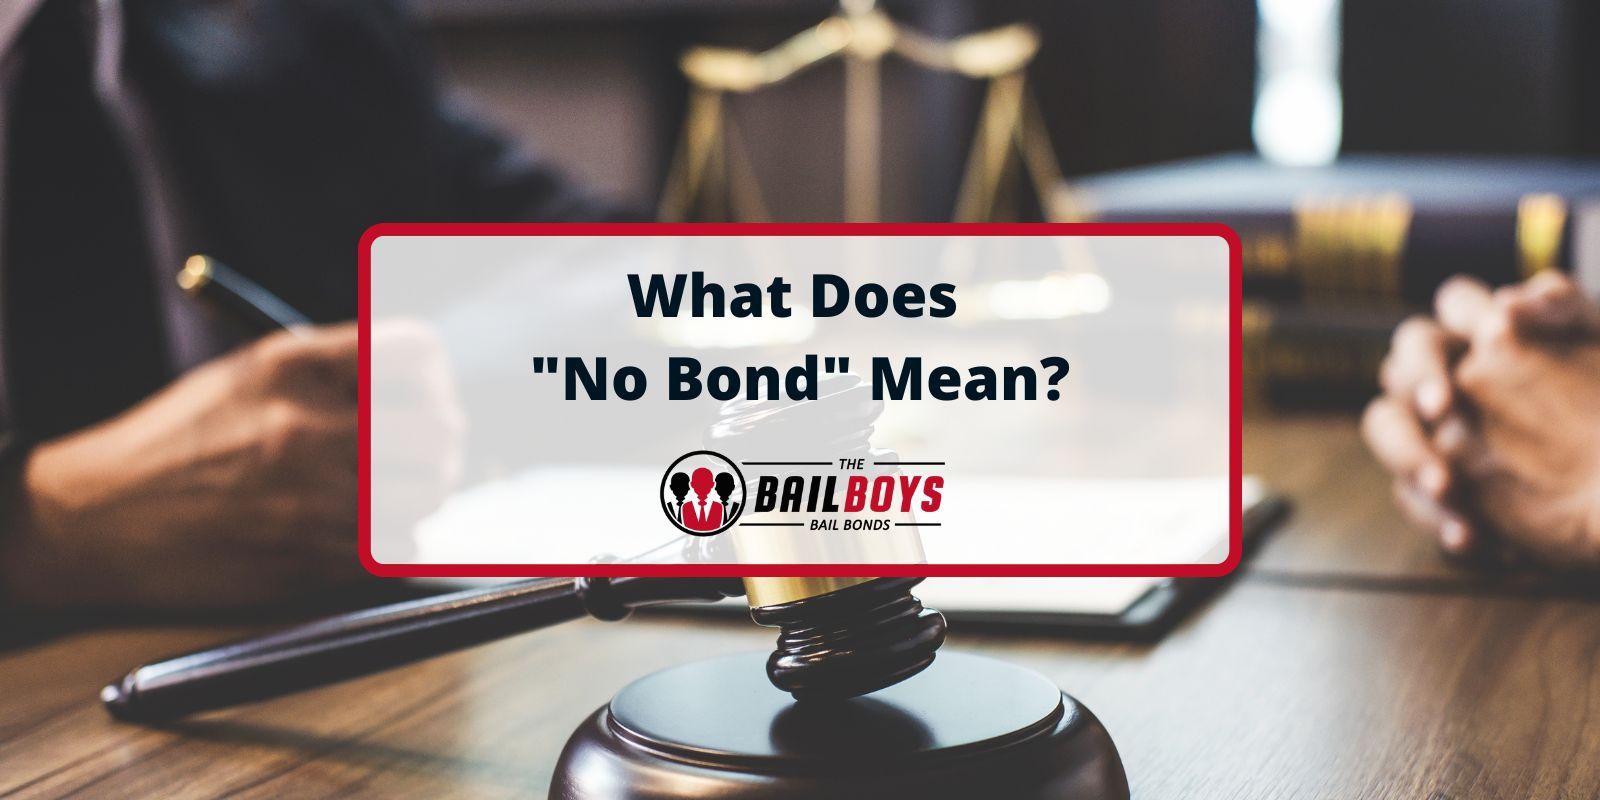 What Does "No Bond" Mean?